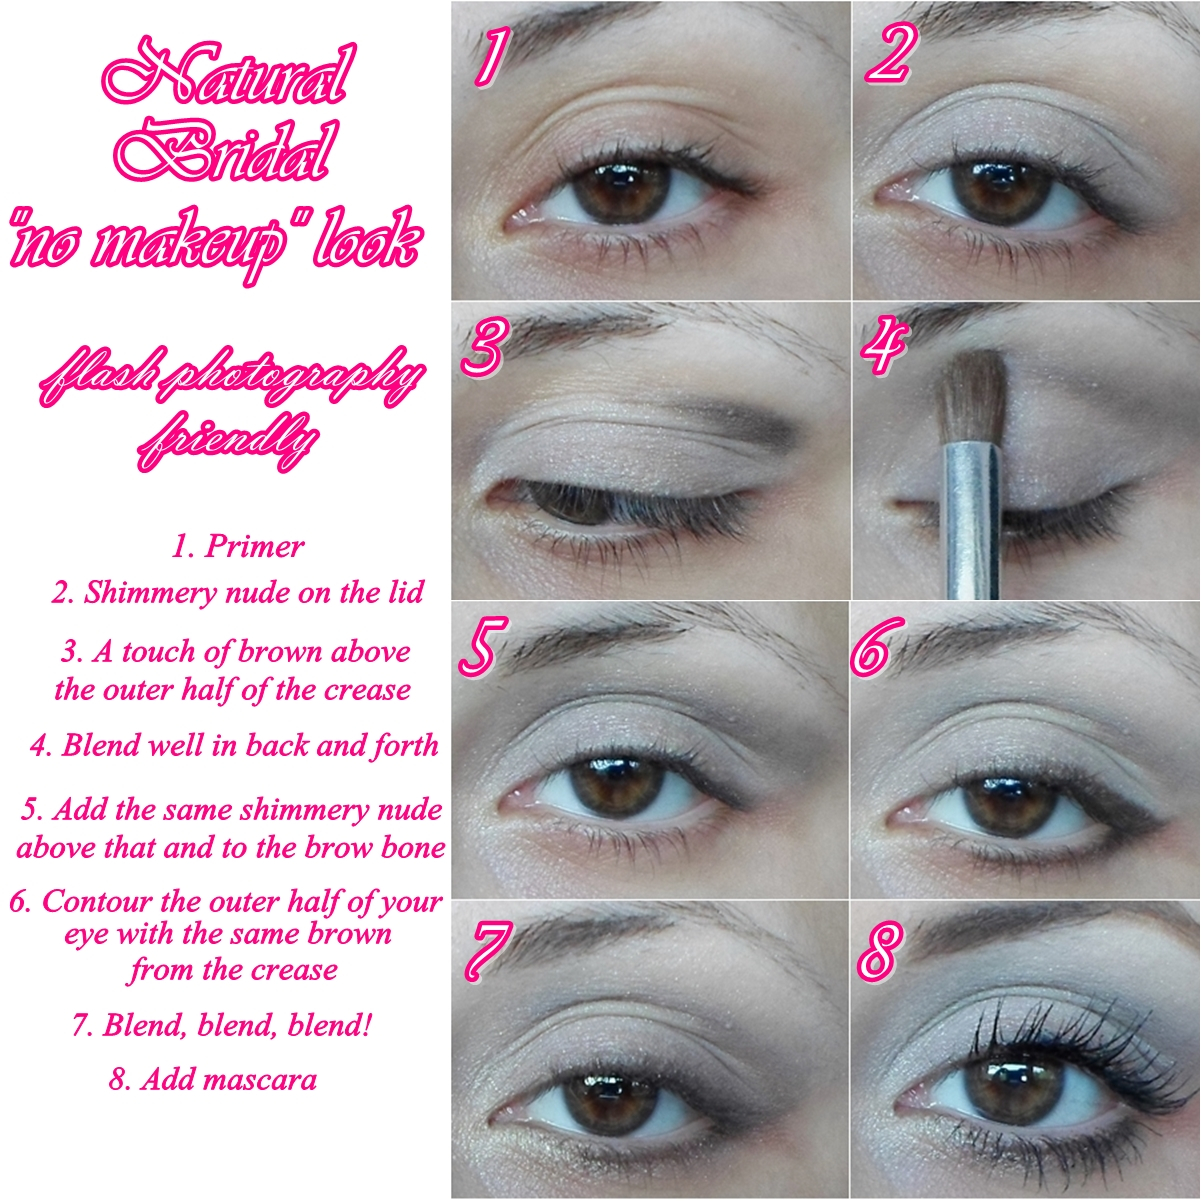 How To Do Wedding Eye Makeup Bridal Natural No Makeup Step Step Tutorial Great For Flash